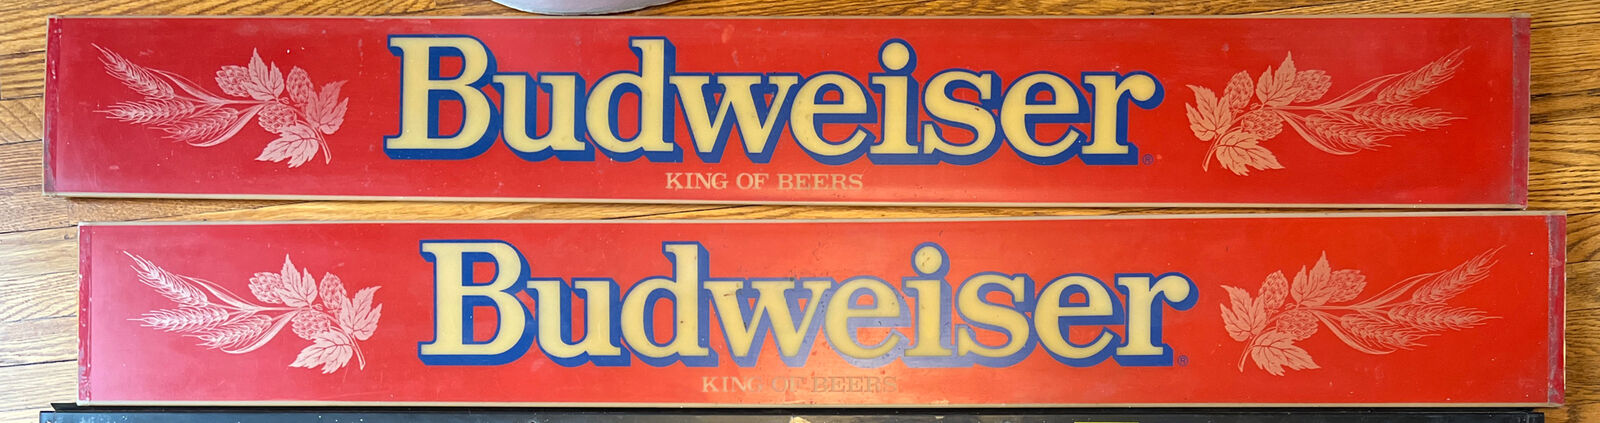 BUDWEISER HANGING POOL TABLE LAMP INSERTS 2 - 1980'S VINTAGE